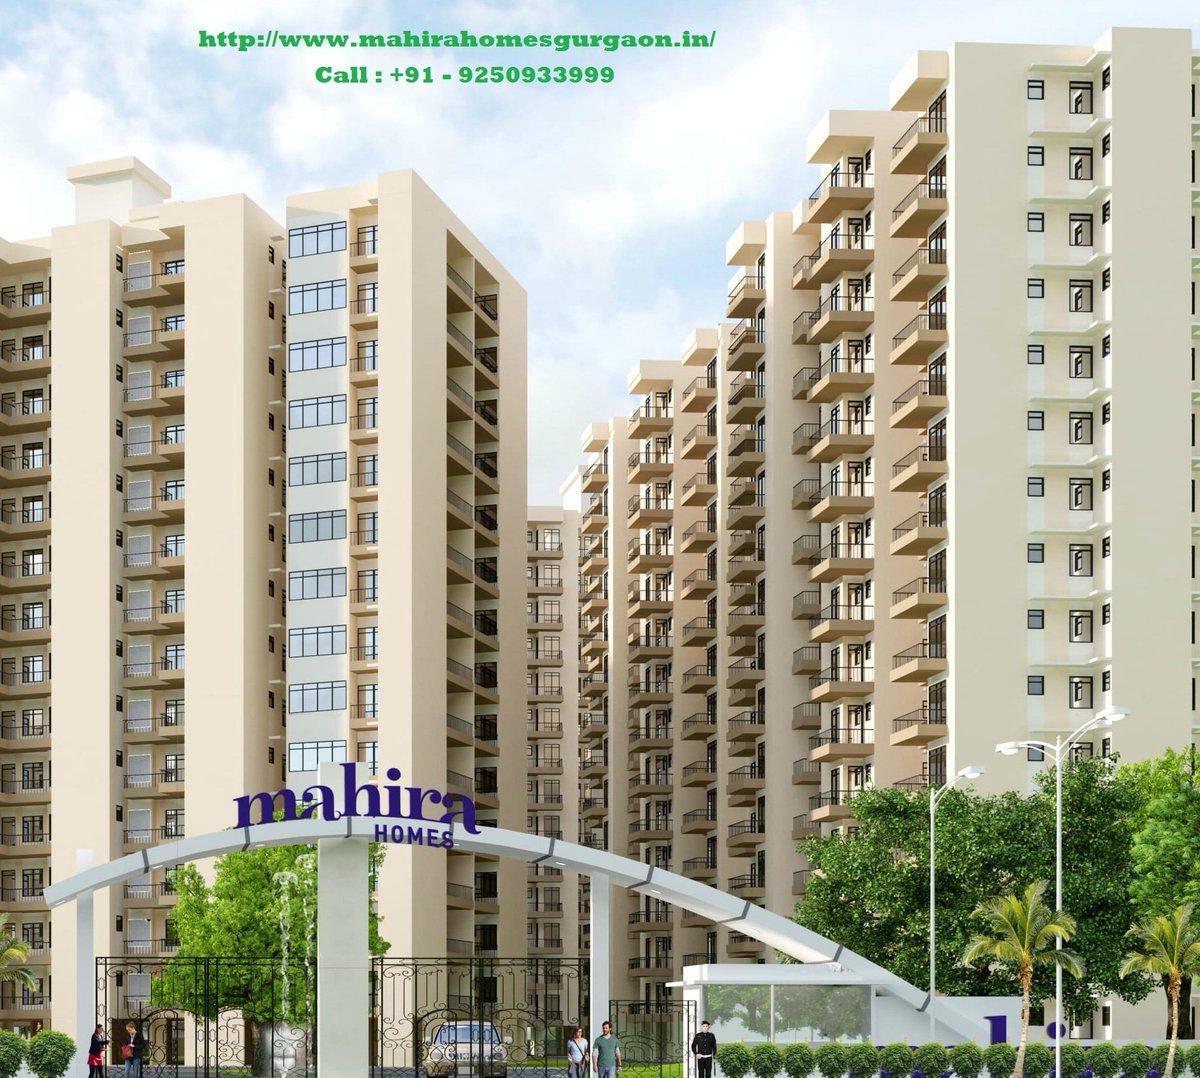 Mahira Group is coming up with its new and much awaited affordable housing project in @mahirahomes Affordable housing sector 68 Gurgaon near golf course extension Sohna Road. goo.gl/RKDxom